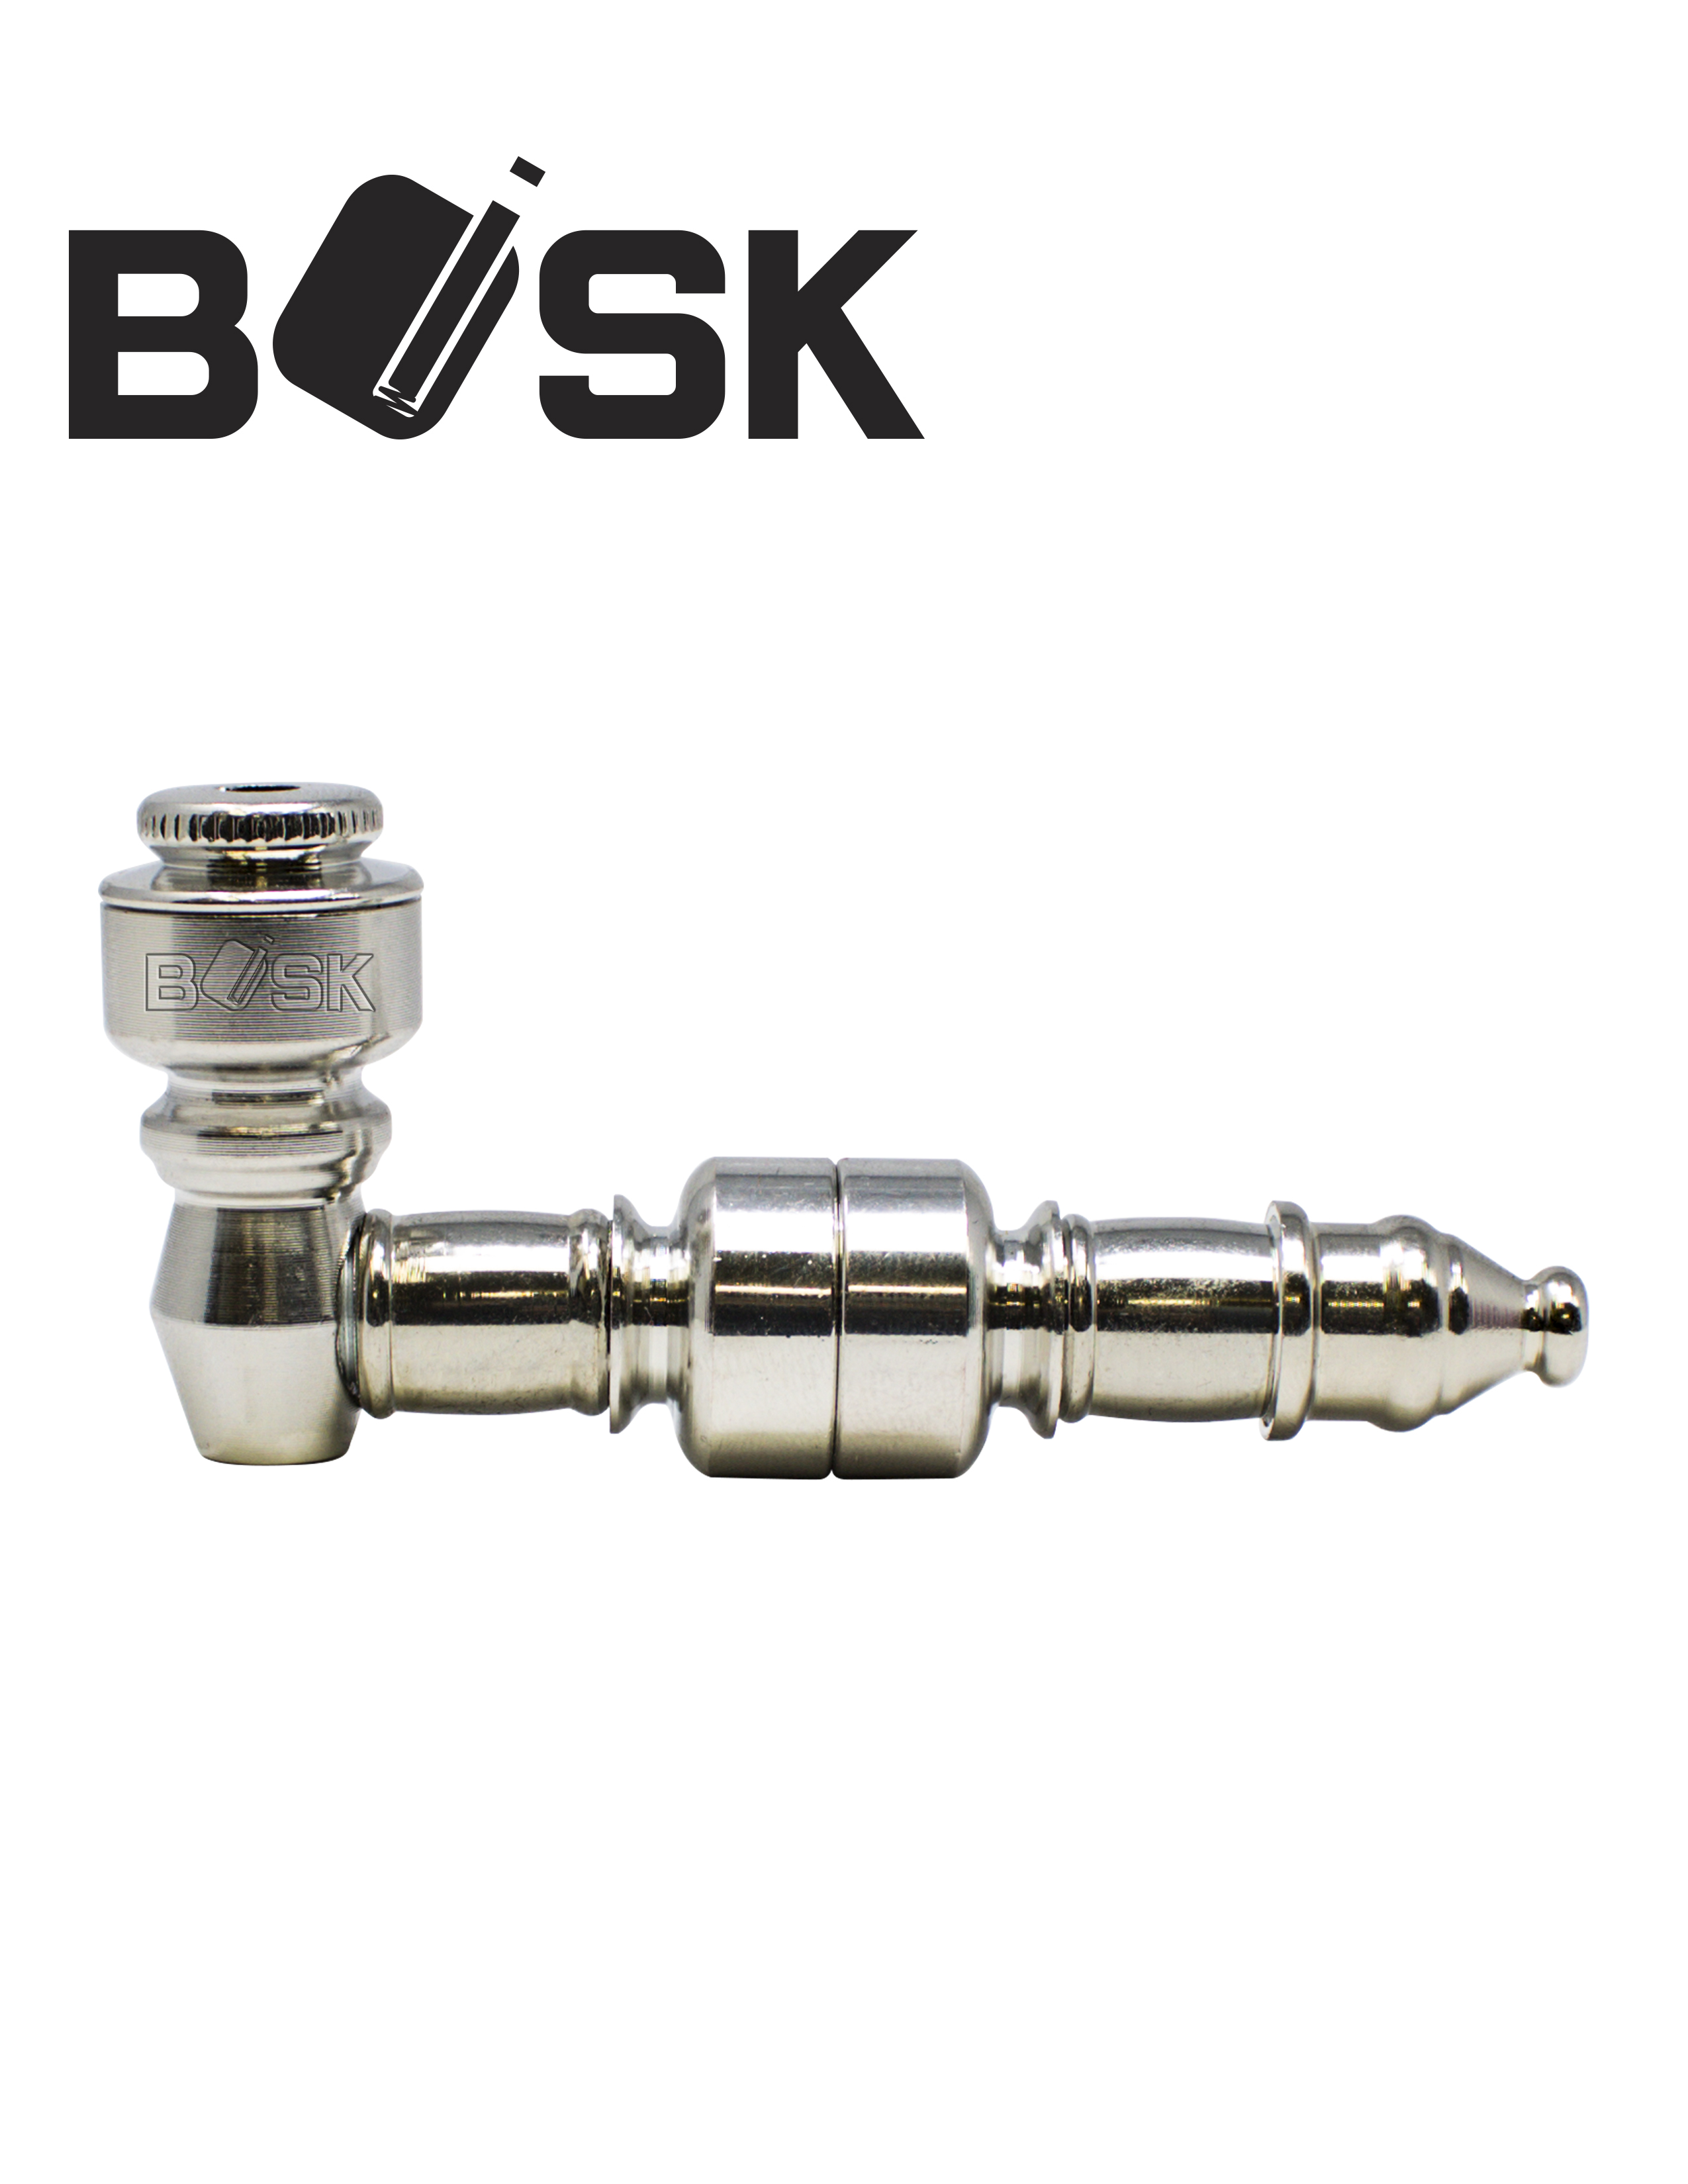 Bosk 4 Inches Metal Hand Pipe